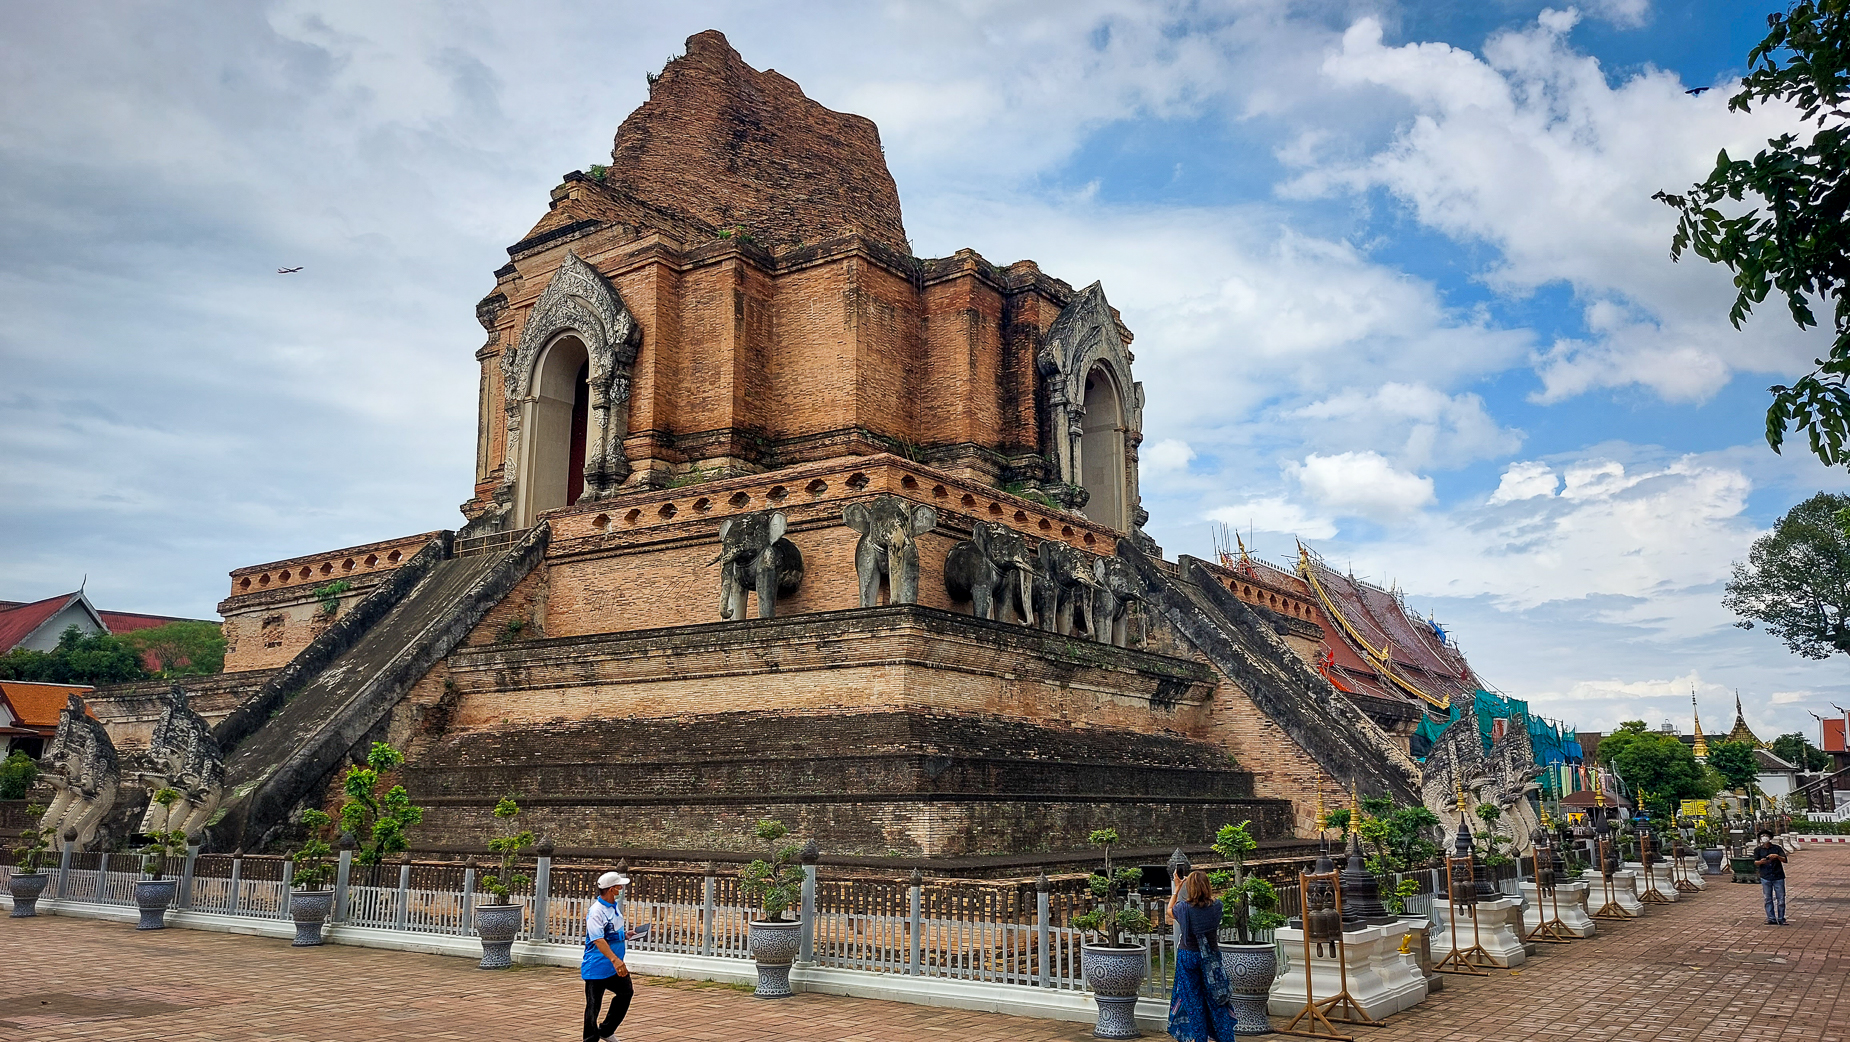 <span  class="uc_style_uc_tiles_grid_image_elementor_uc_items_attribute_title" style="color:#ffffff;">Chiang Mai is the second biggest city in Thailand, ...and full of beautiful temples</span>